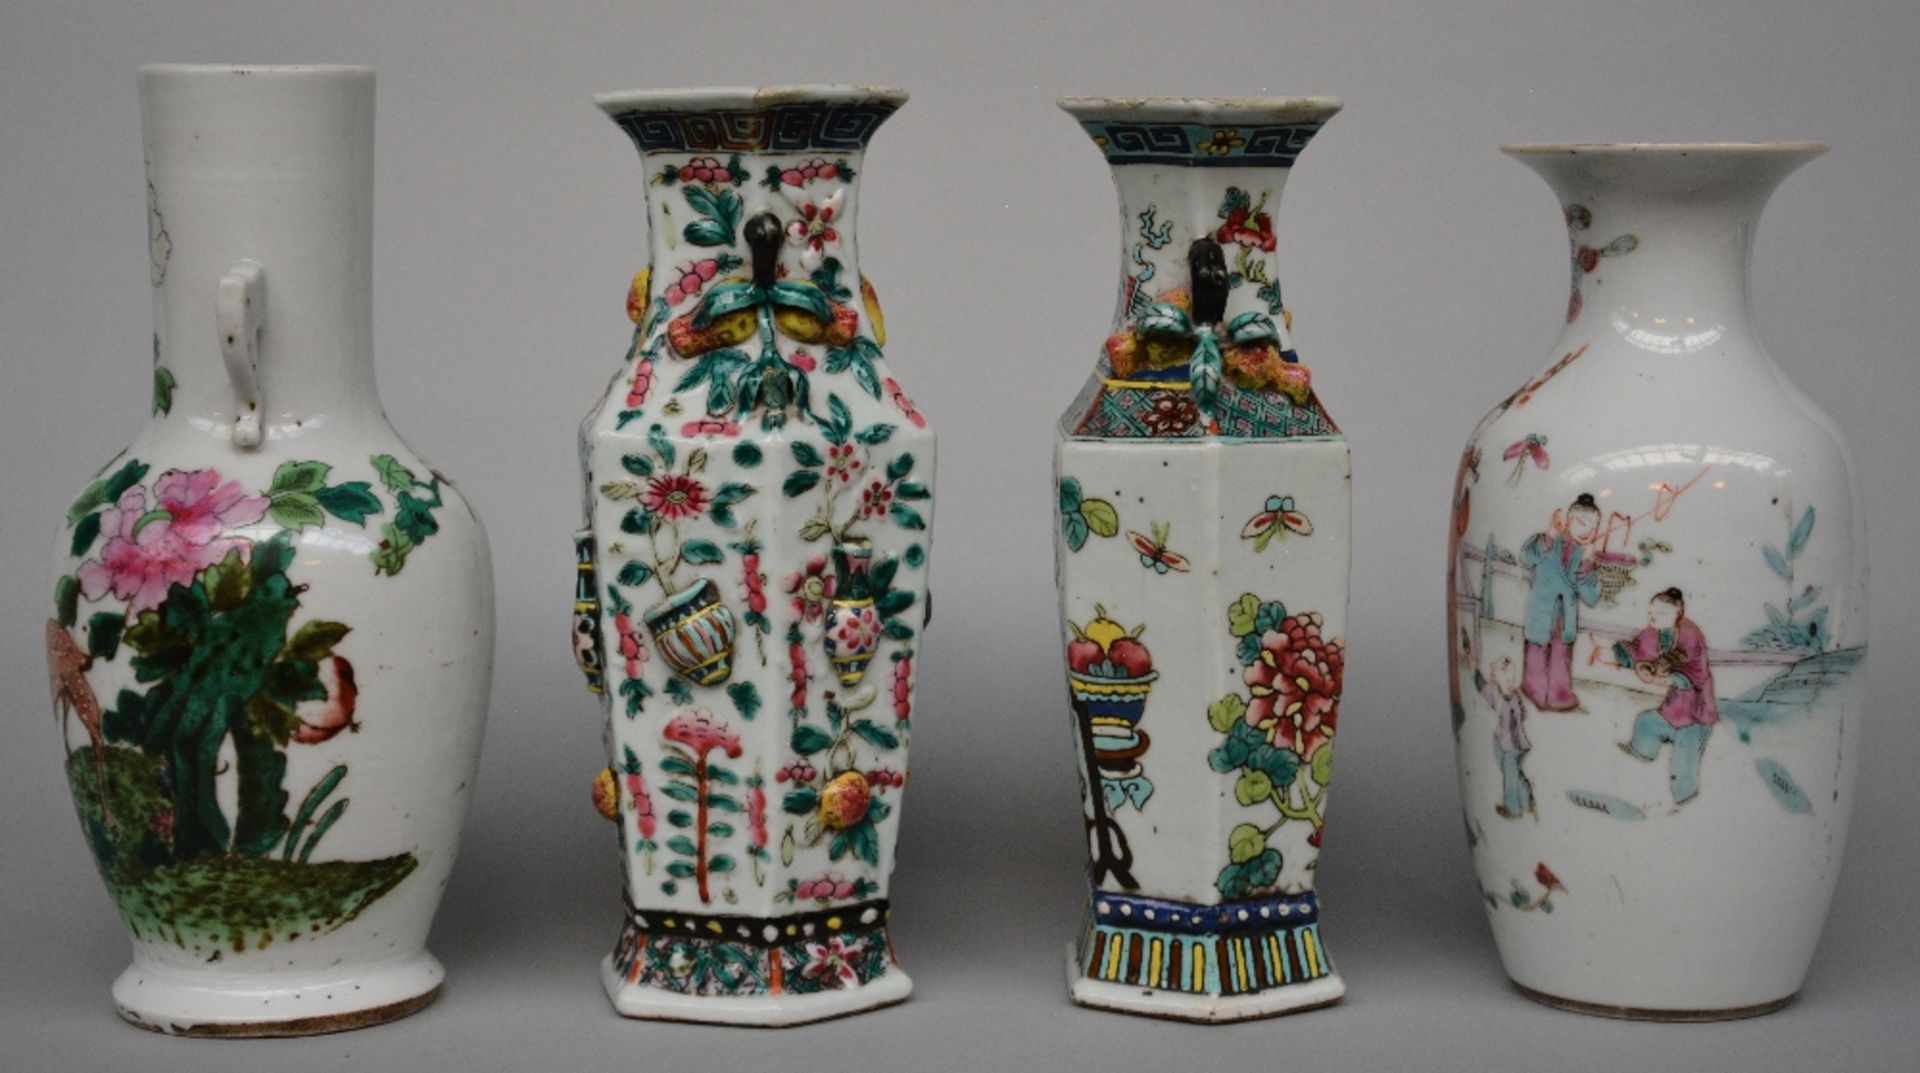 Four Chinese polychrome decorated vases depicting figures, birds, a deer and other symbols, H 22 -24 - Bild 2 aus 7